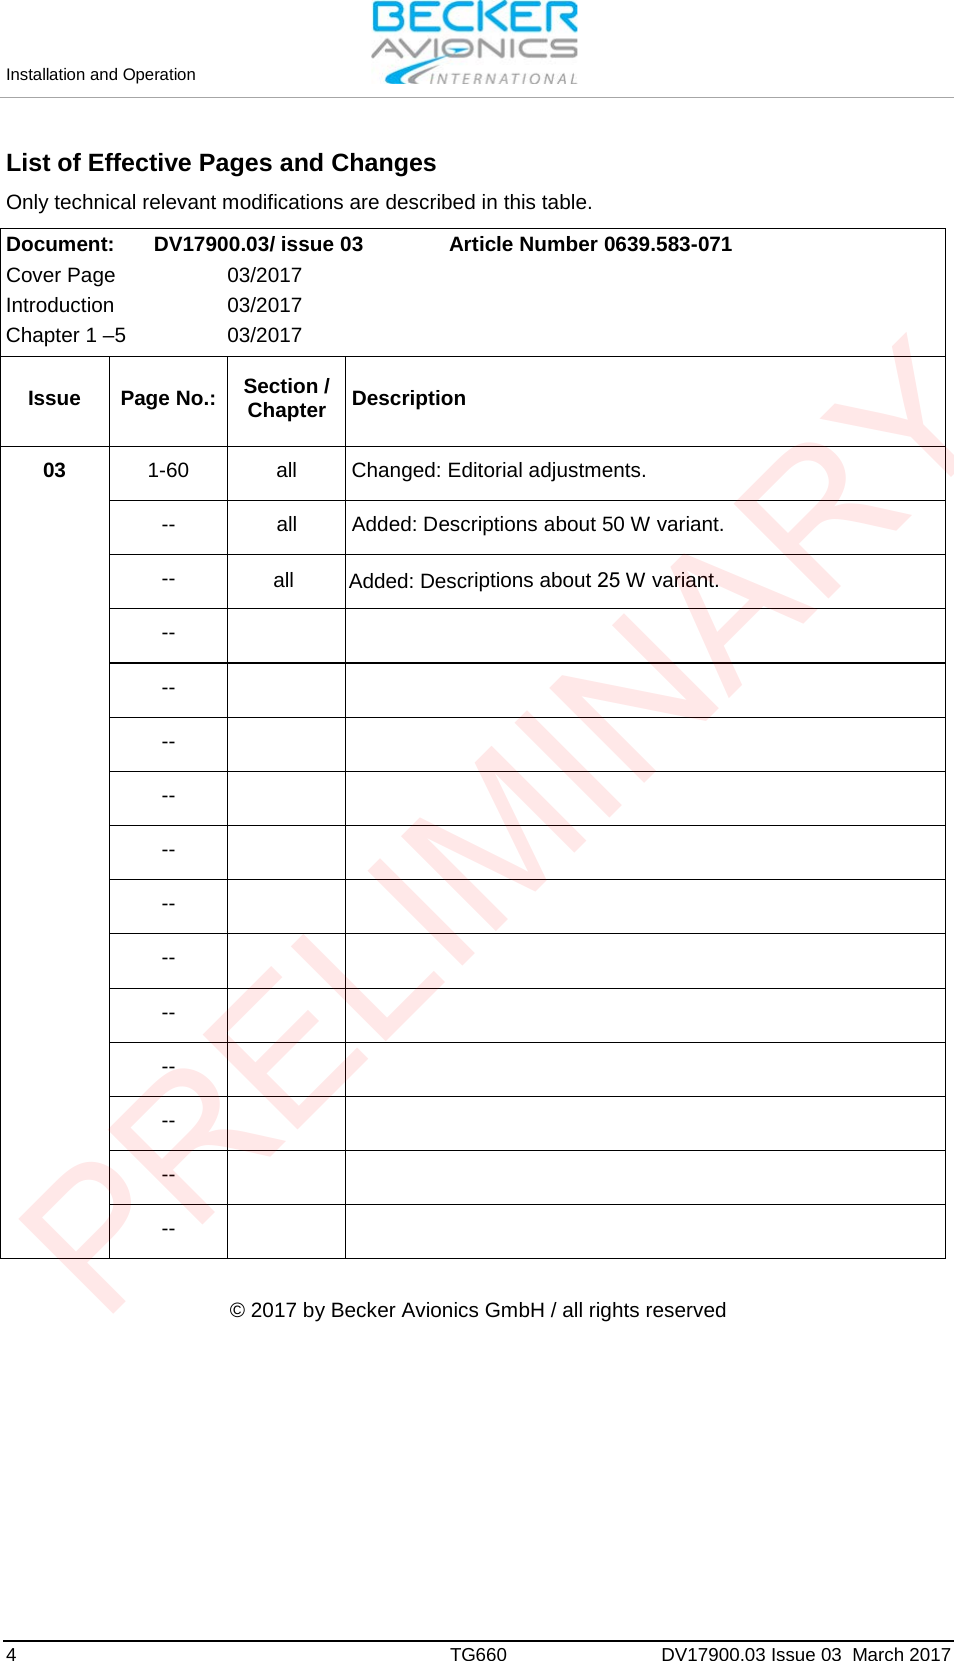 Installation and Operation 4  TG660 DV17900.03 Issue 03  March 2017 List of Effective Pages and Changes Only technical relevant modifications are described in this table.  Document:  DV17900.03/ issue 03  Article Number 0639.583-071 Cover Page  03/2017 Introduction  03/2017 Chapter 1 –5  03/2017 Issue Page No.: Section / Chapter Description 03  1-60 all Changed: Editorial adjustments. -- all Added: Descriptions about 50 W variant. -- -- -- -- -- -- -- -- -- -- -- -- -- © 2017 by Becker Avionics GmbH / all rights reserved all Added: Descriptions about 25 W variant. PRELIMINARY